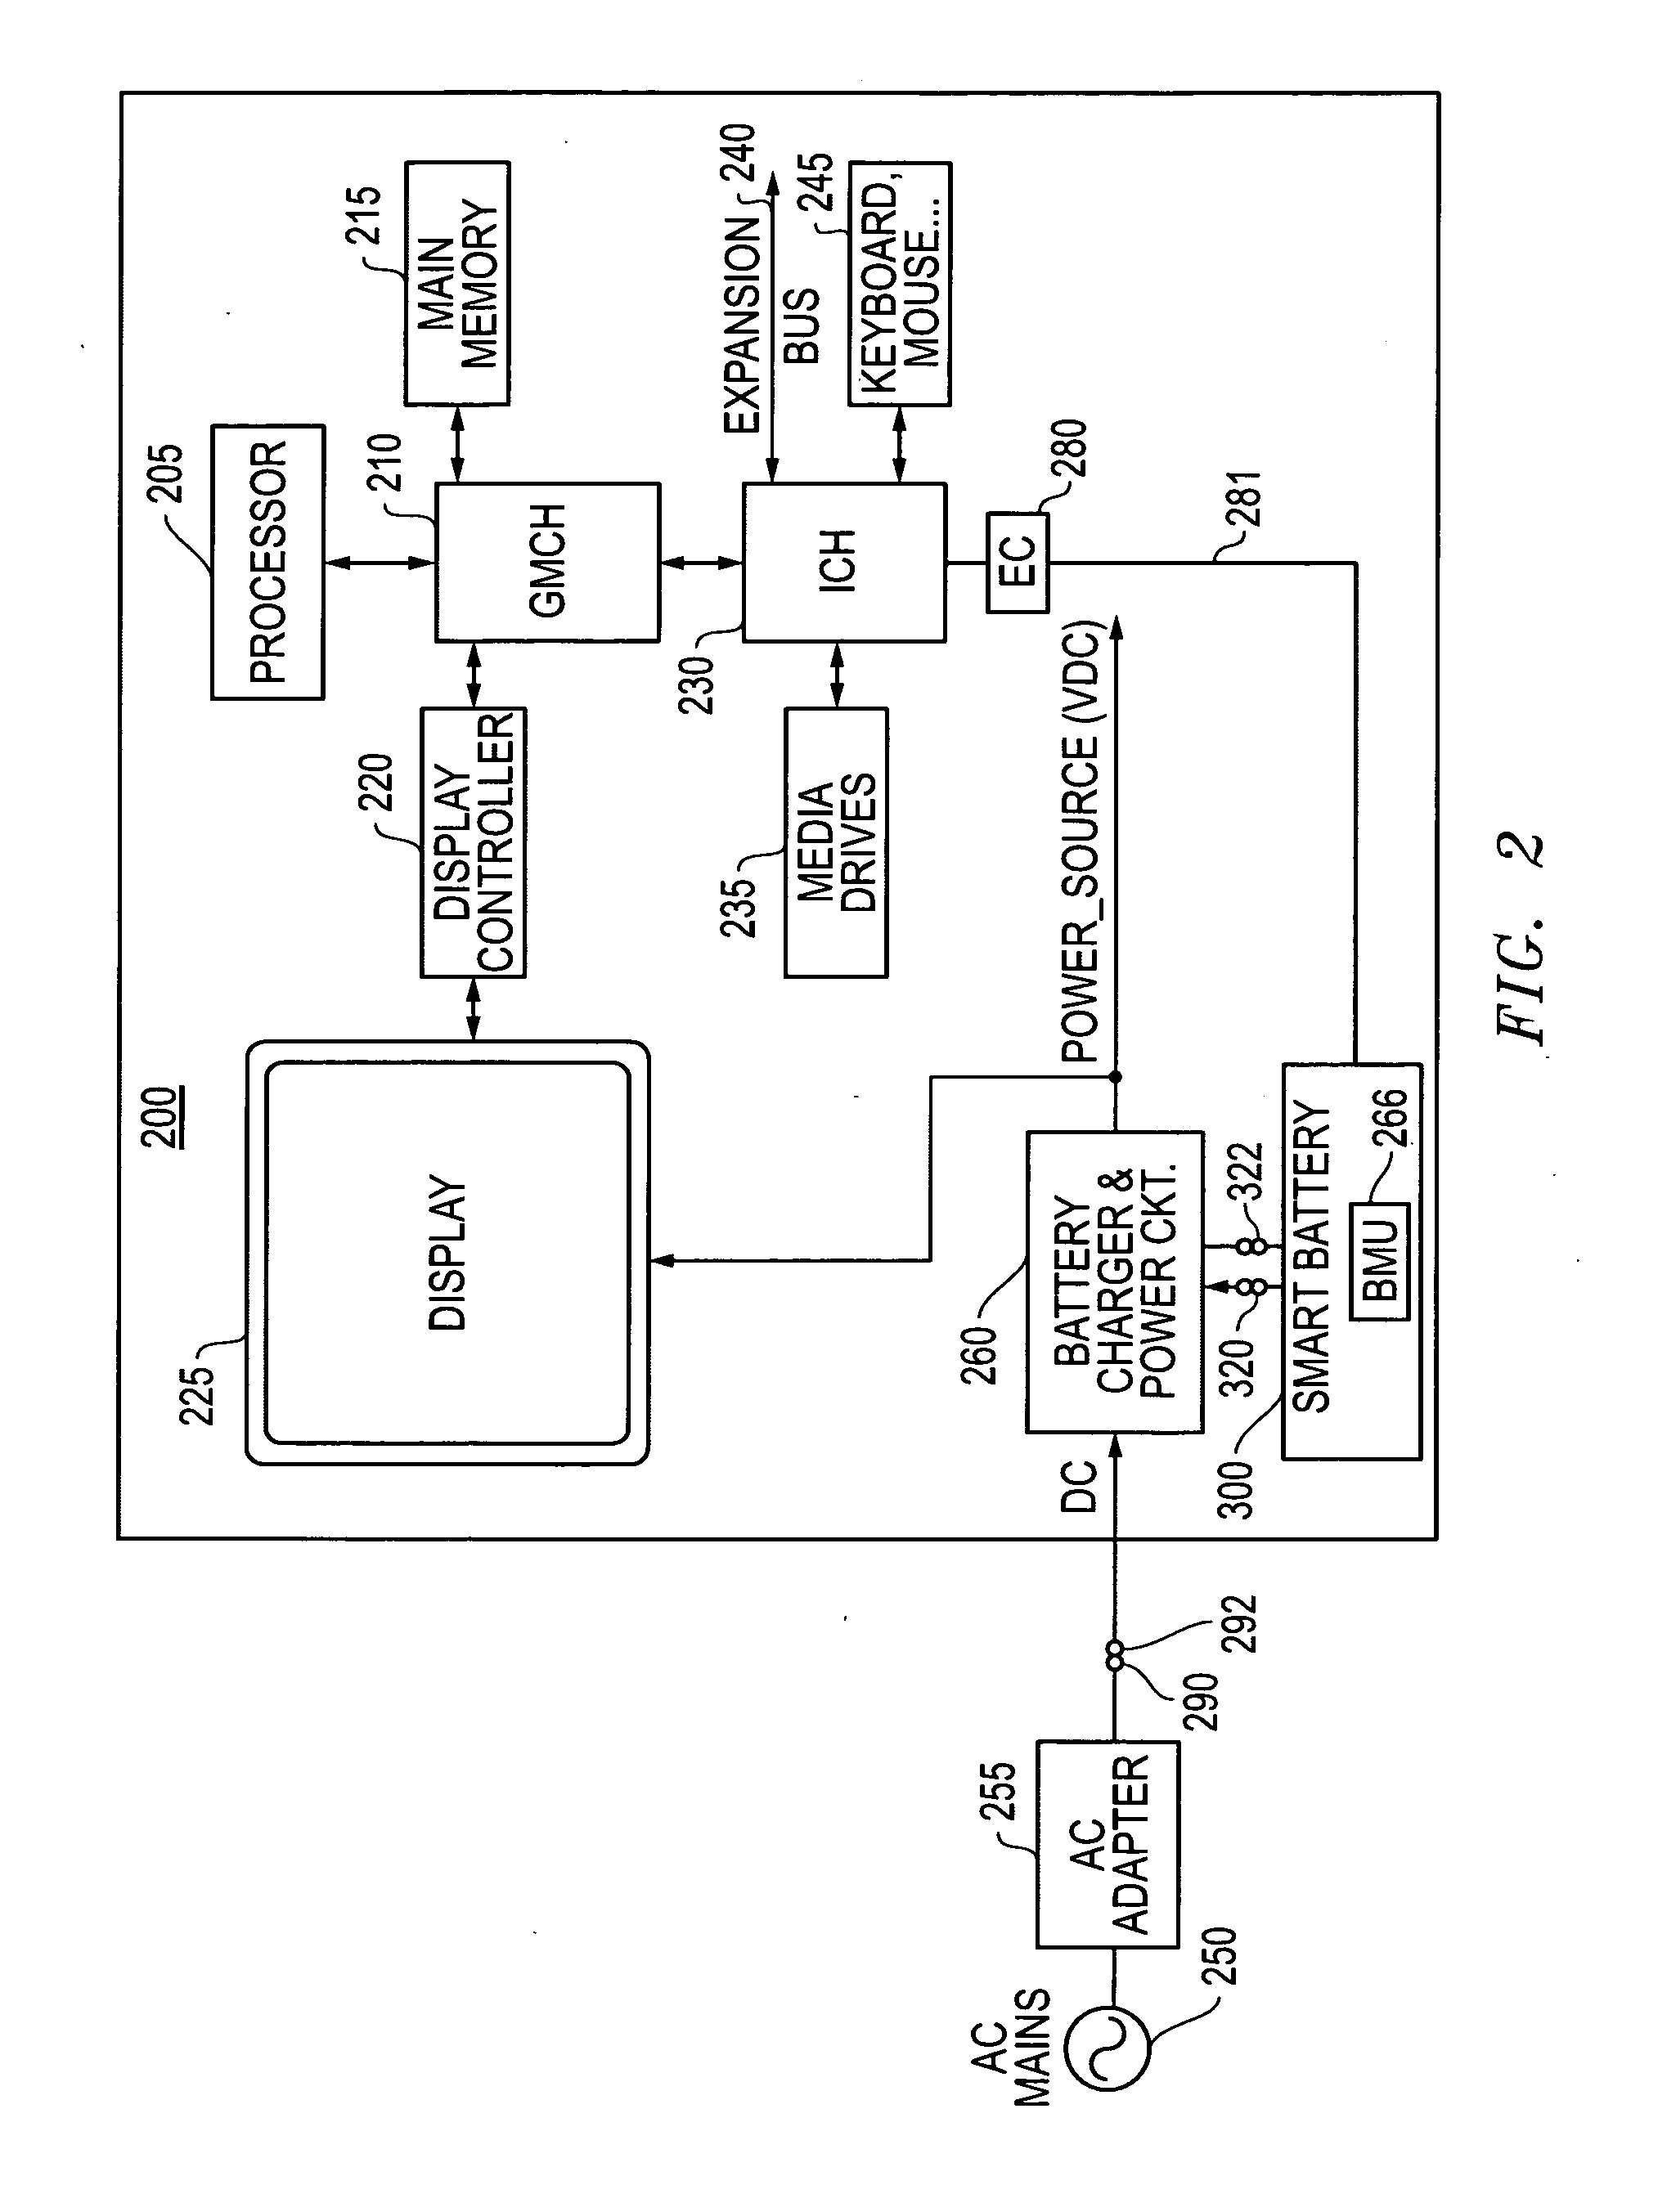 Systems and methods for configuring and charging hybrid battery systems